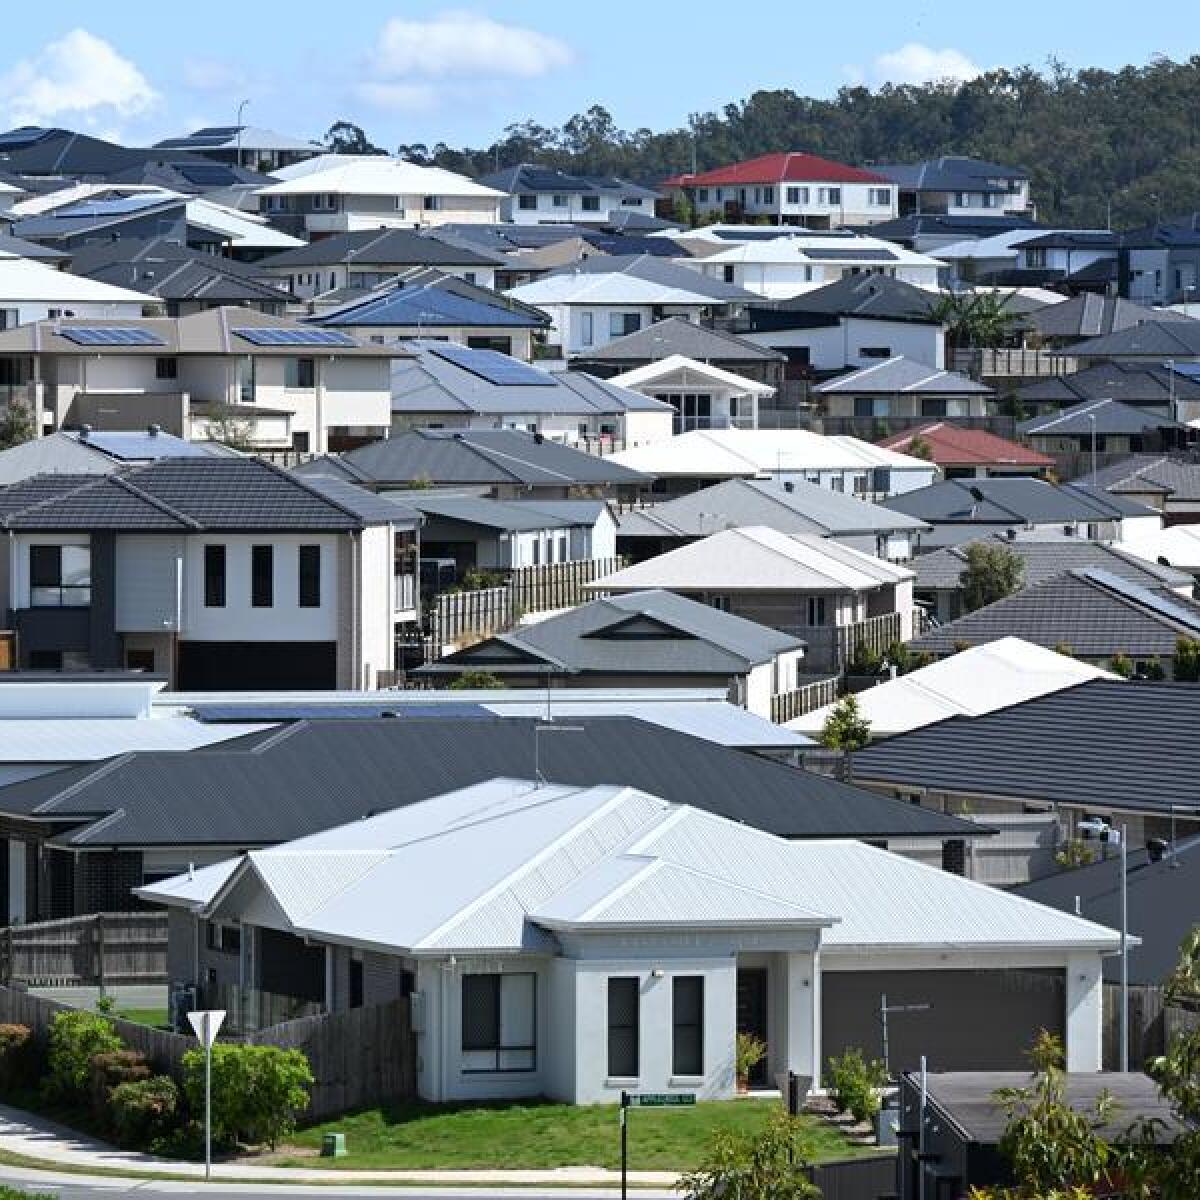 Homes in a new housing estate